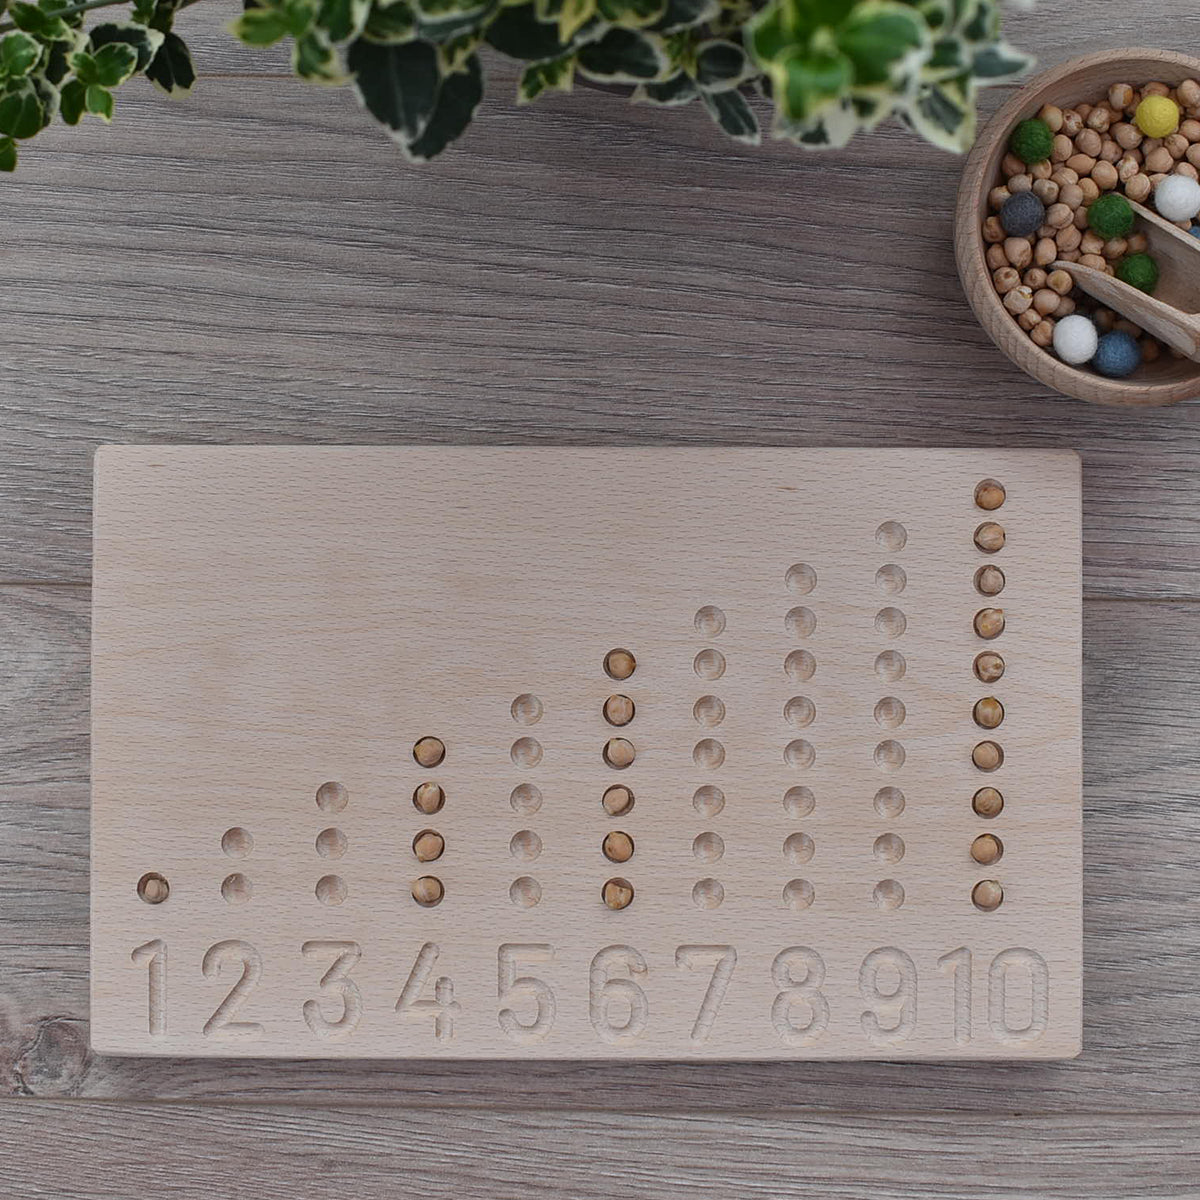 Wooden Educational Resource Abacus for Counting with chick peas